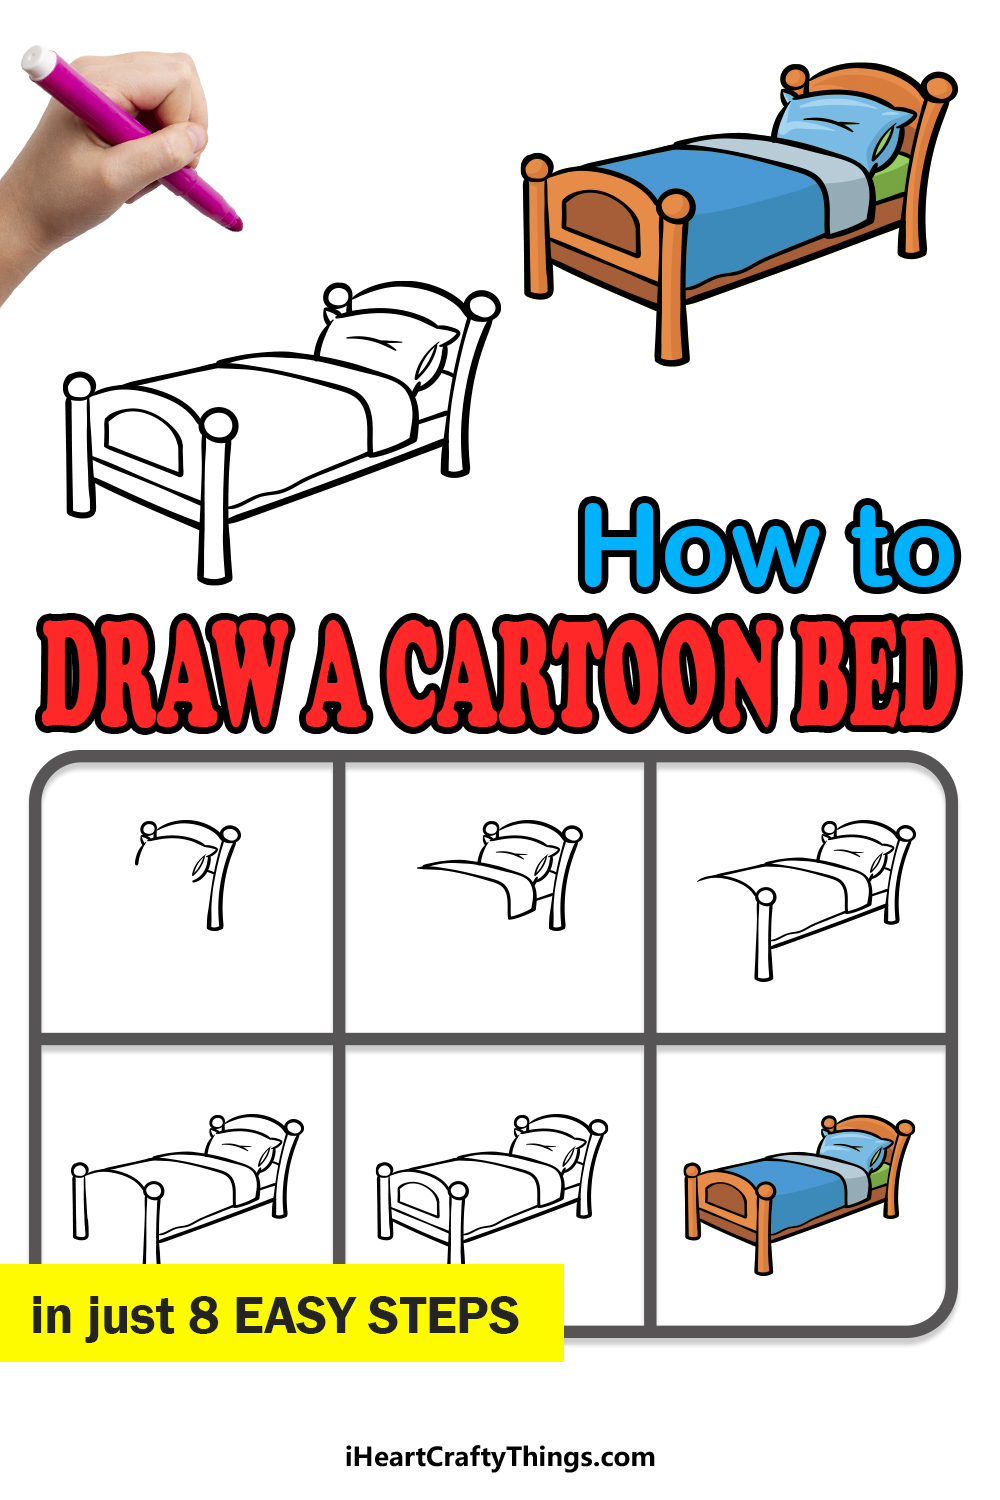 how to draw a cartoon bed in 8 easy steps